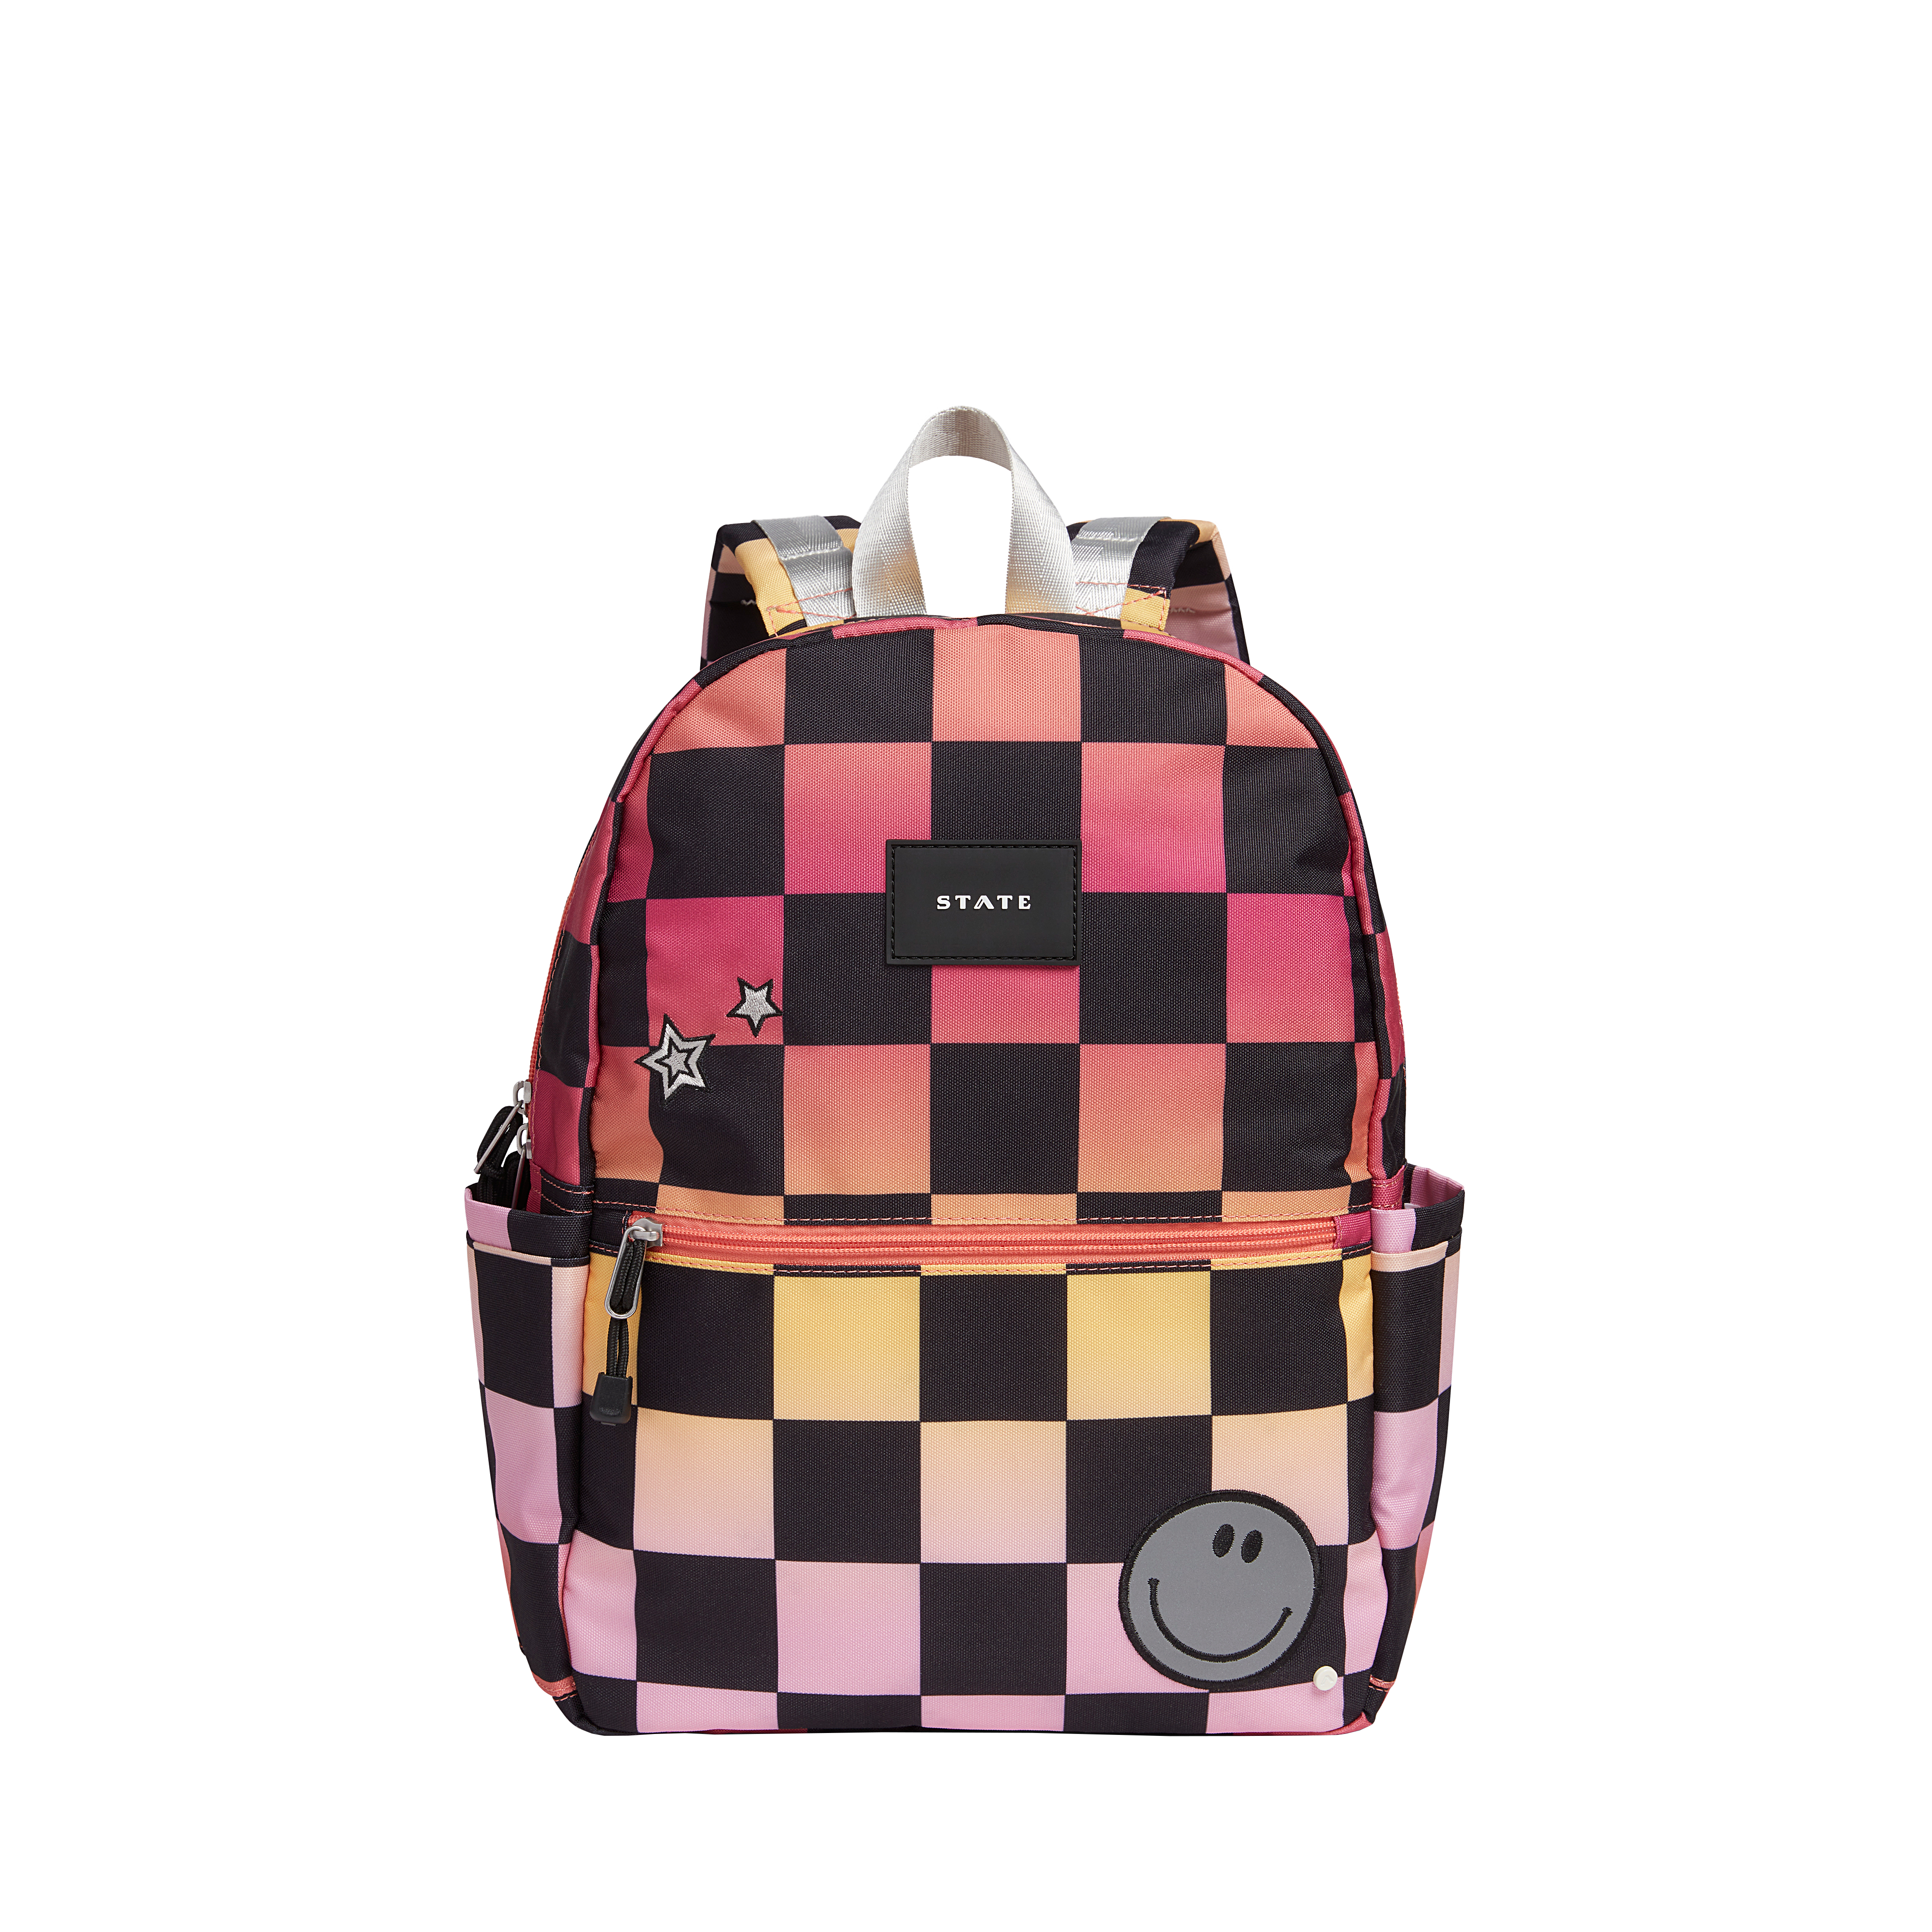 Kane Kids Double Pocket Backpack in Diagonal Zippers - State Bags